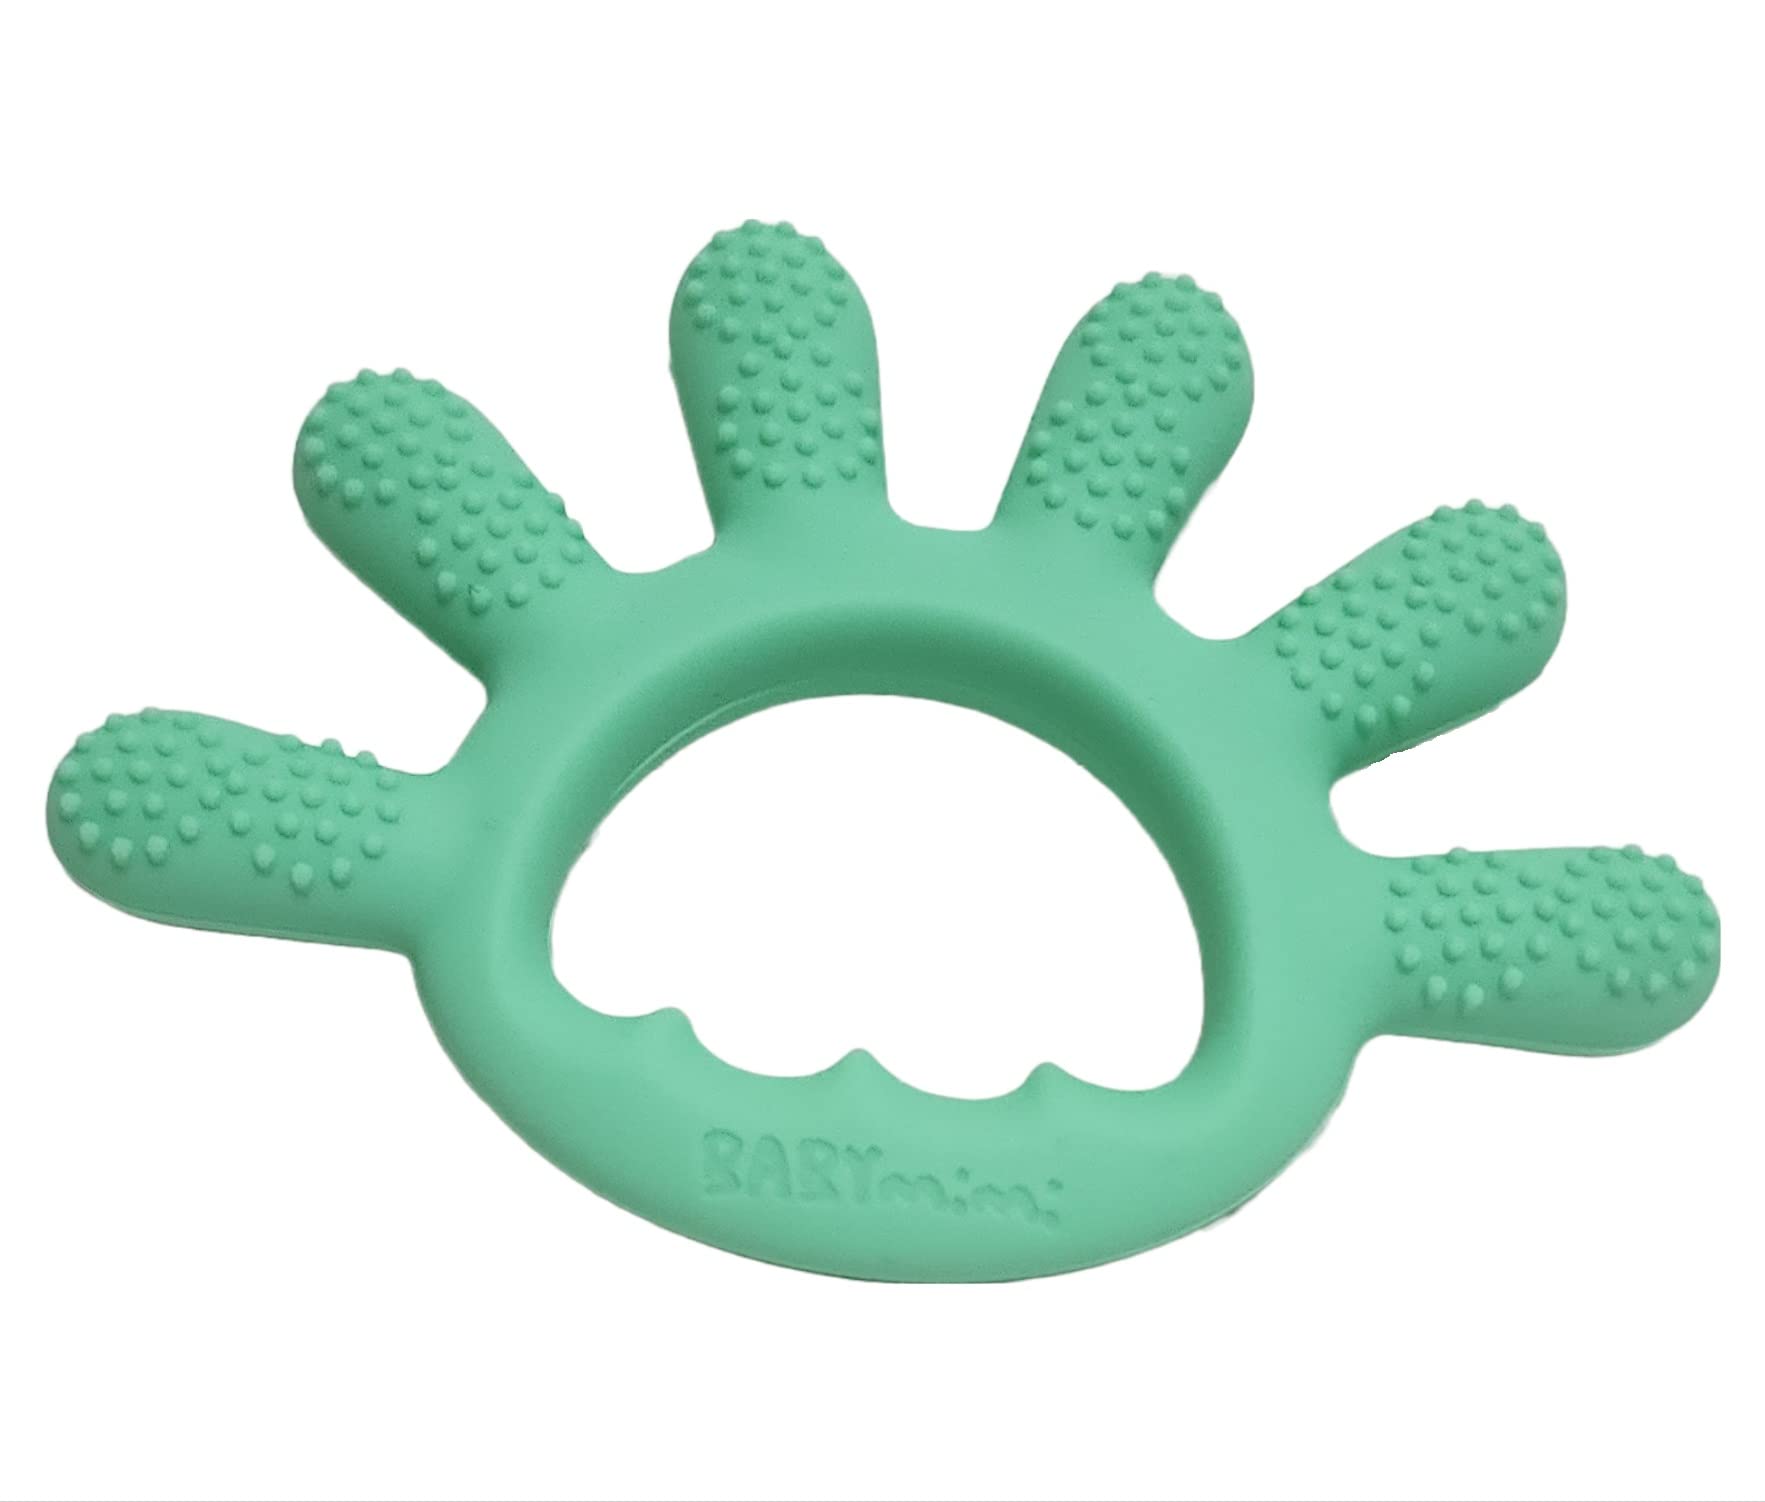 Shield baby teether has a unique textured design that provides